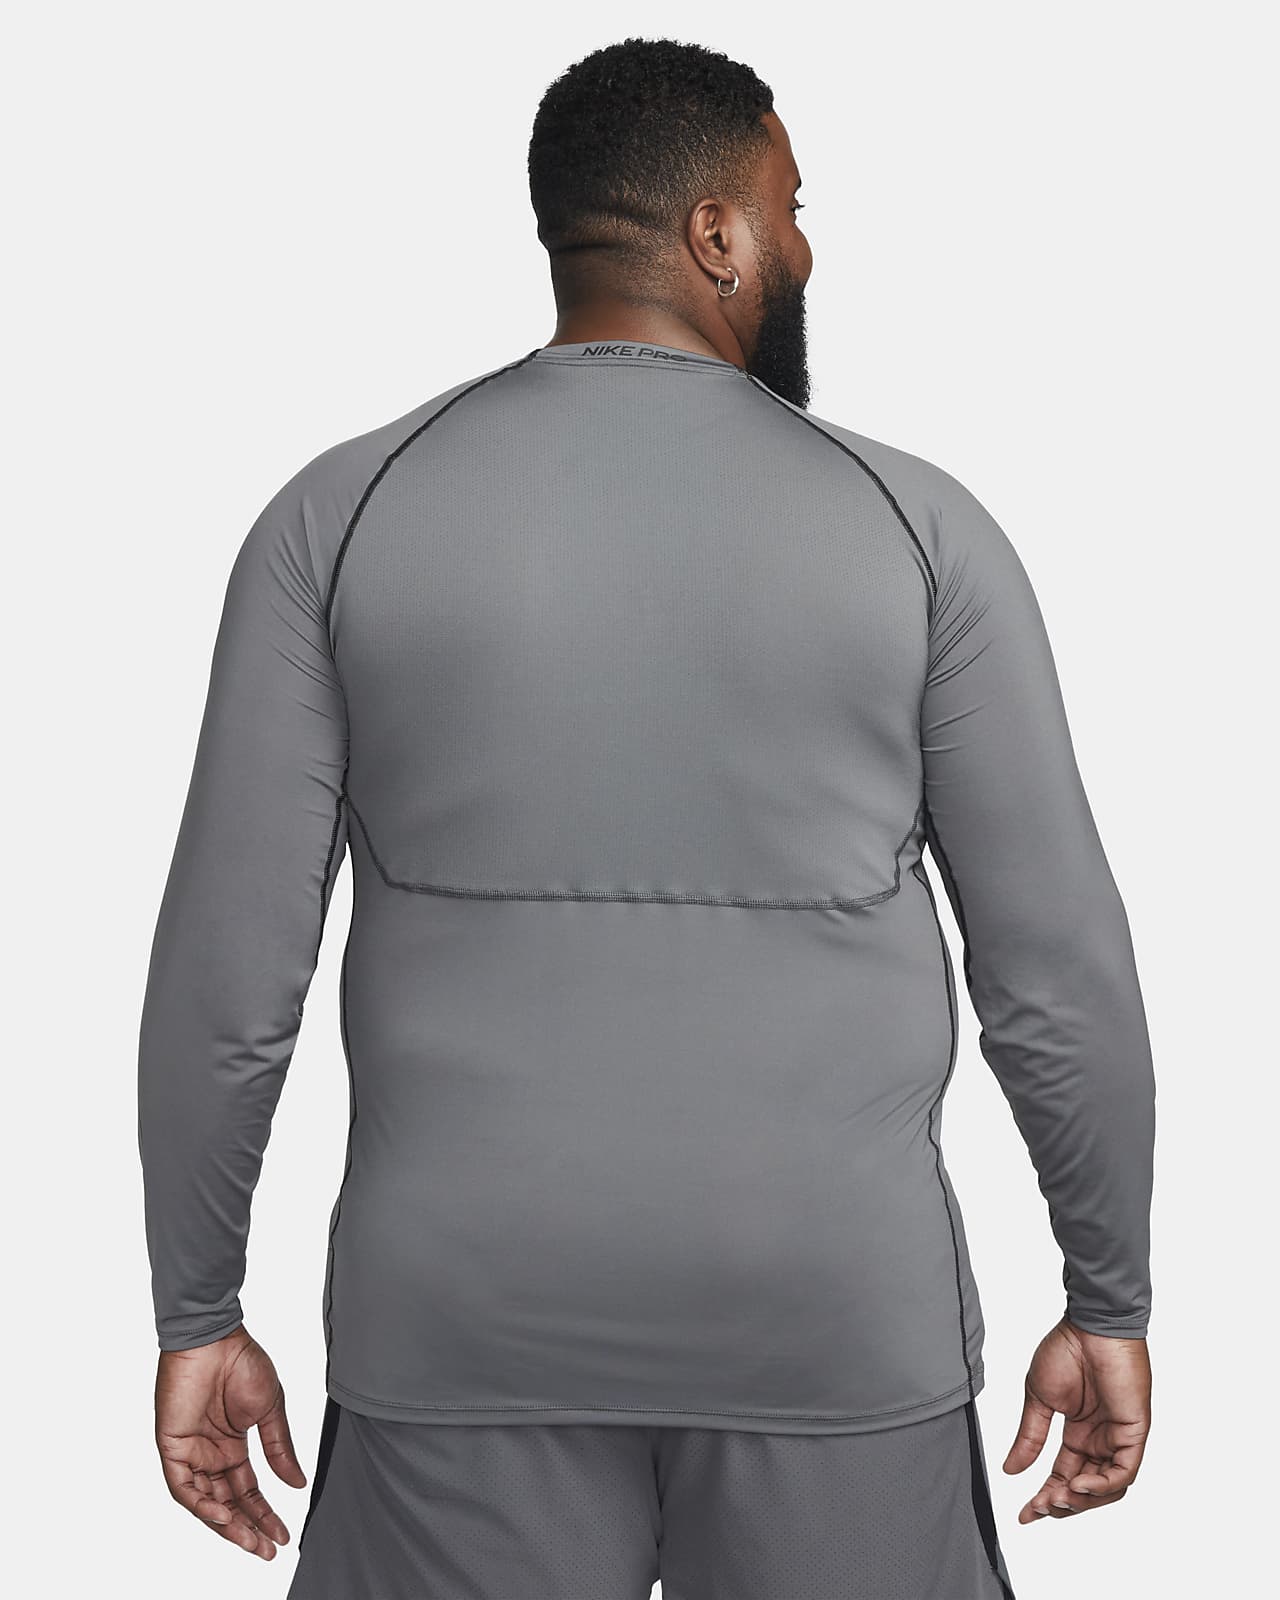 NIKE PRO DRI-FIT TIGHT-FIT LONG-SLEEVE TOP 'WHITE